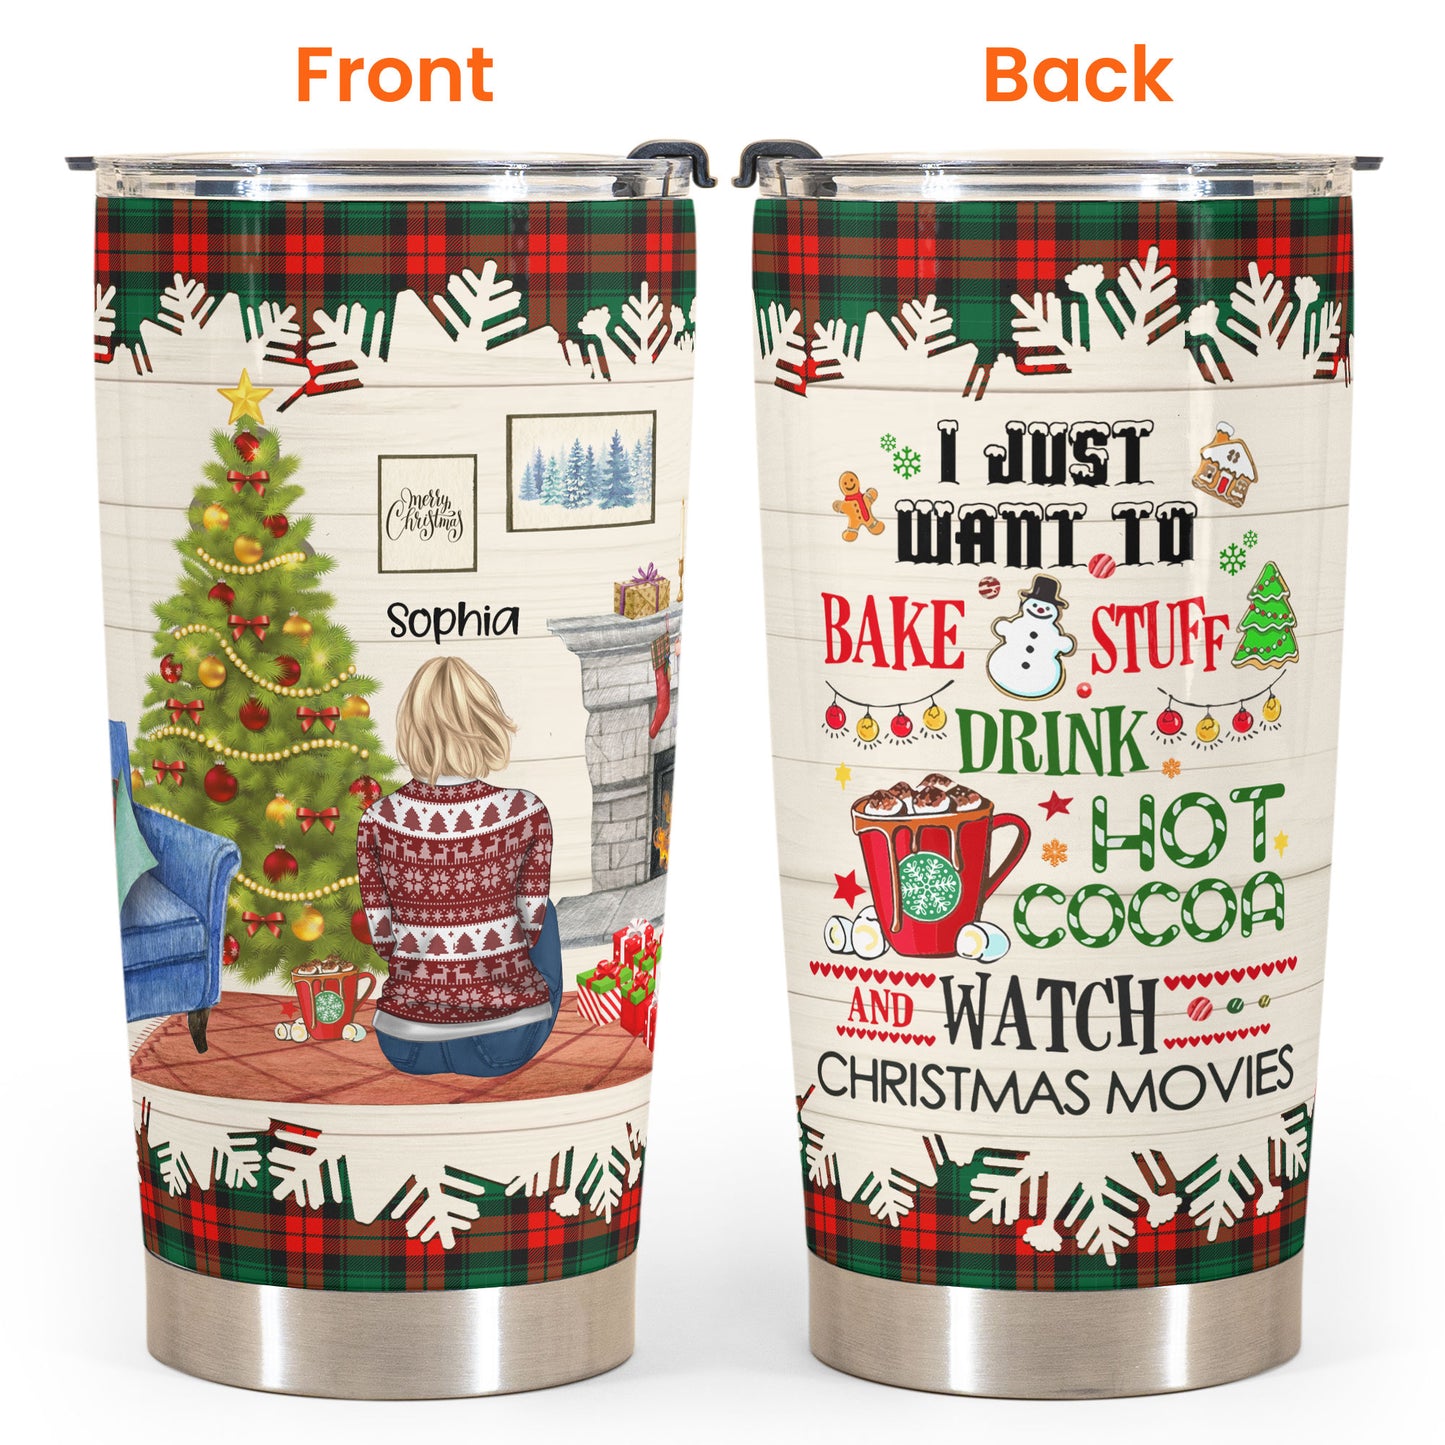 Bake Stuff And Drink Cocoa - Personalized Tumbler Cup - Christmas Gift For Family & Relationship - Christmas Girl